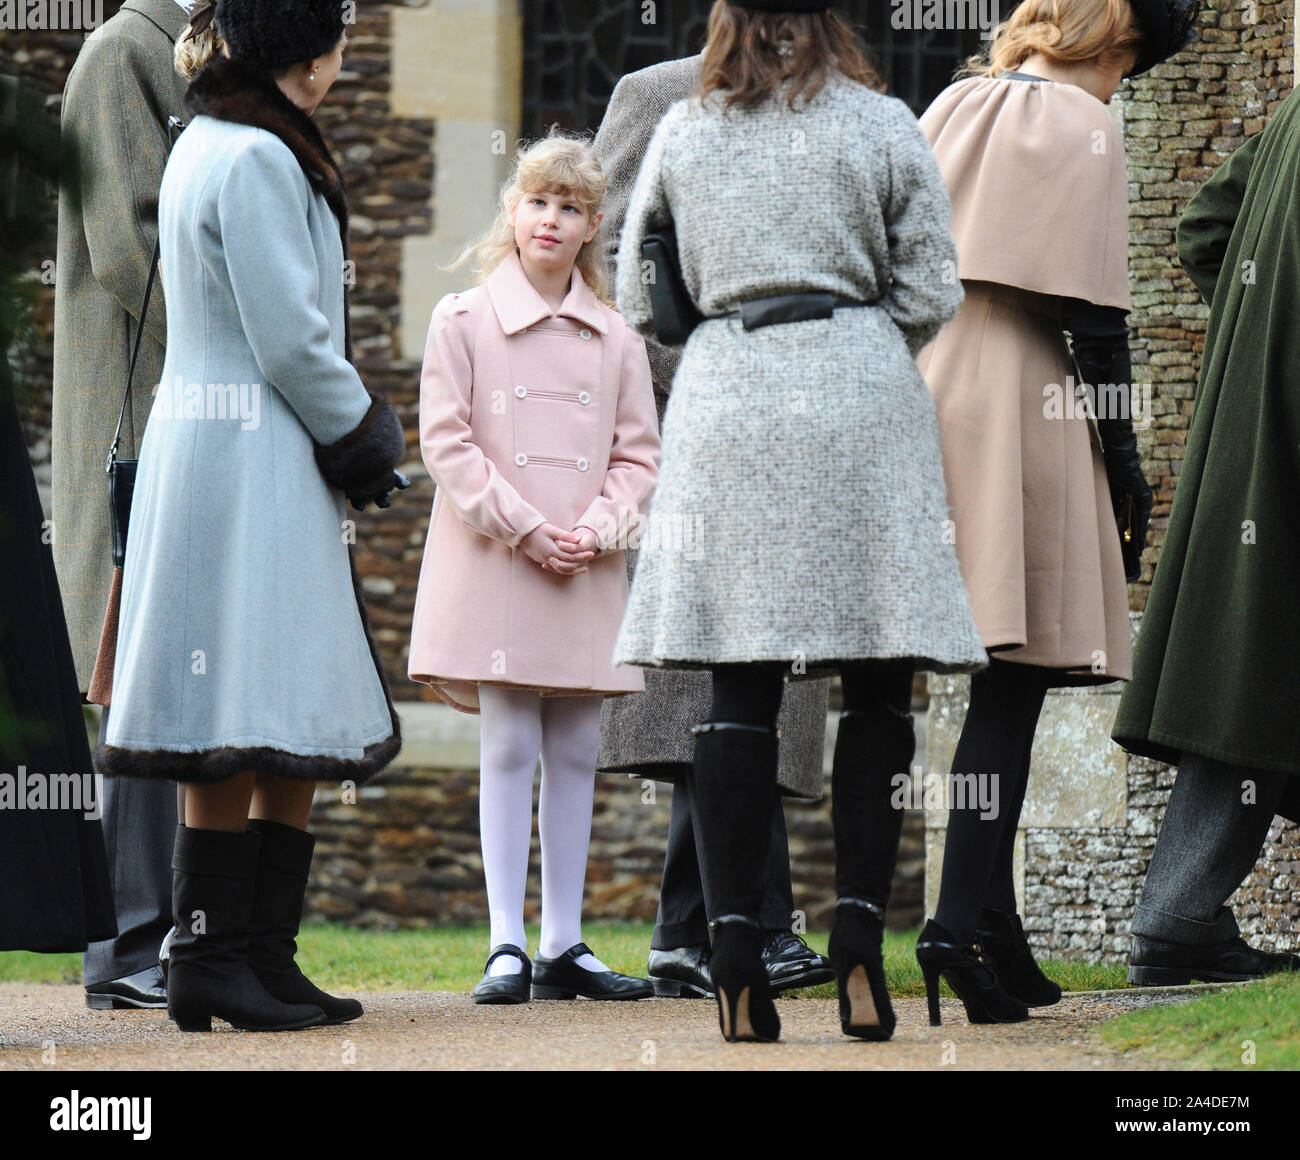 Photo Must Be Credited ©Kate Green/Alpha Press 076785 25/12/12 Princess Anne, Lady Louise Windsor, Princess Eugenie and Princess Beatrice at St Mary Magdalene Church in Sandringham, Norfolk for a Christmas Day Service with the Royal Family Stock Photo